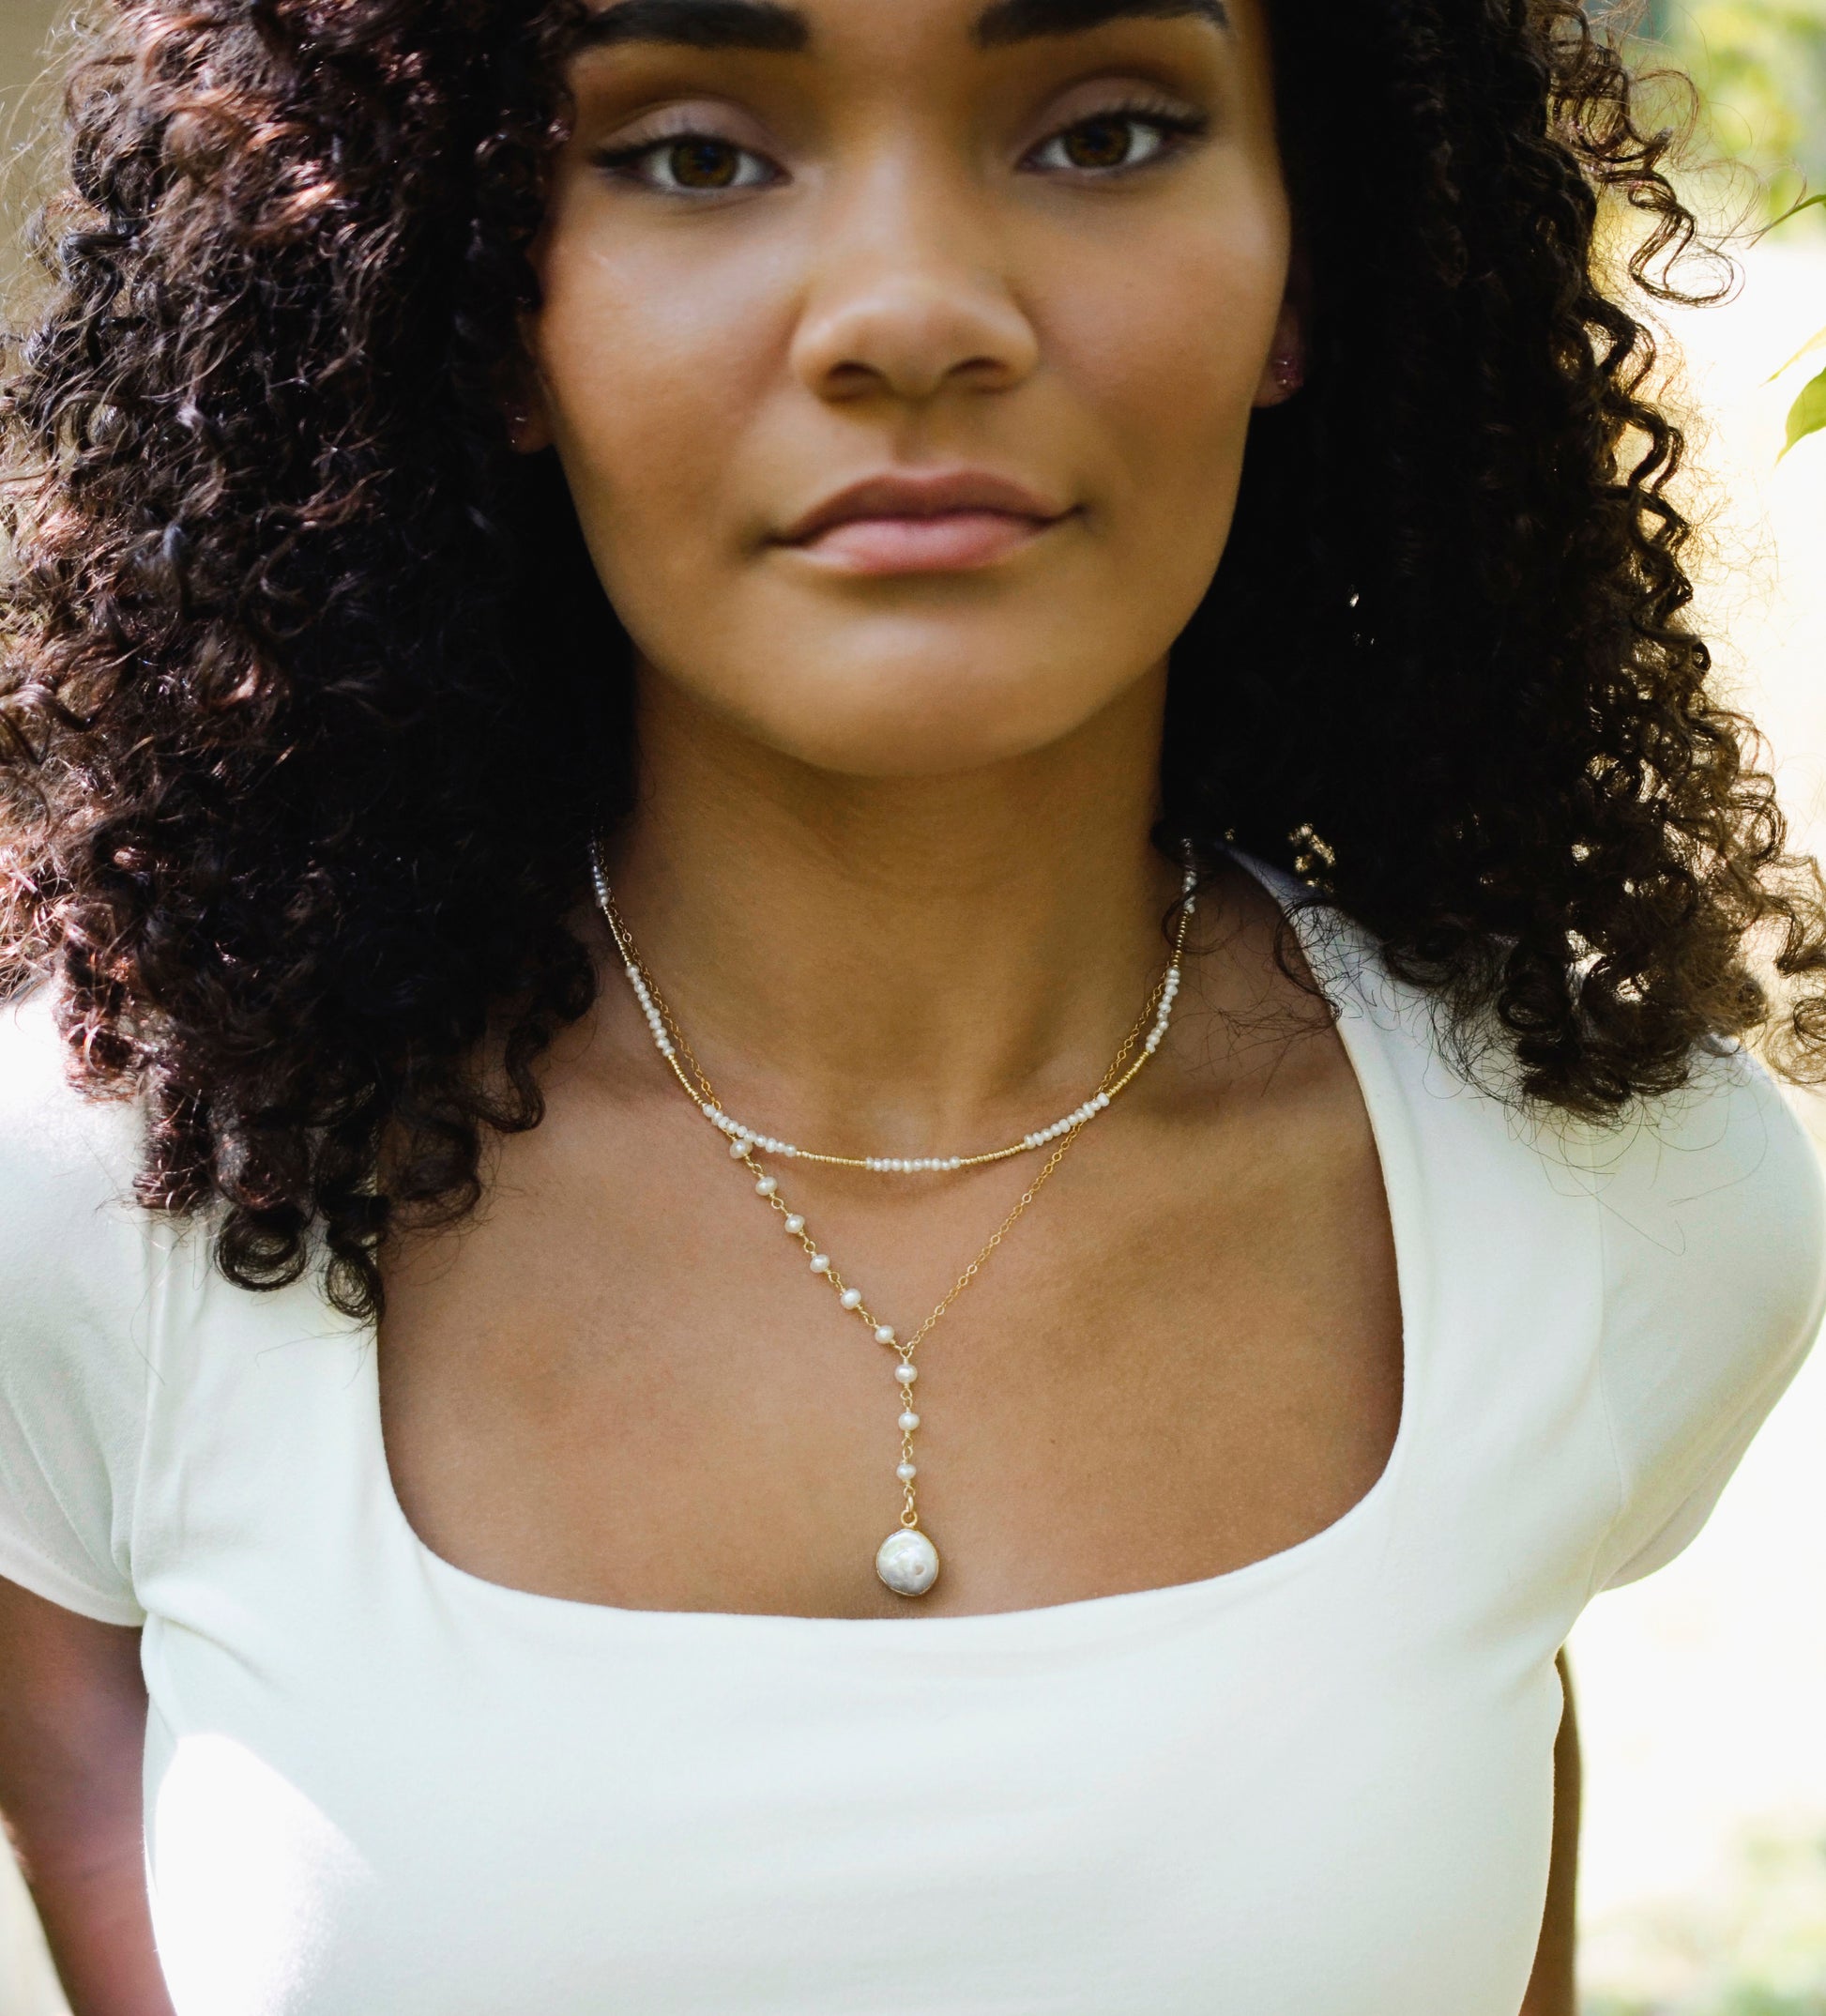 White freshwater pearl necklace with a large coin pearl pendant. Pearls fill one side of the necklace, while the other side is a dainty gold chain. Modeled image. Shown with a beaded pearl choker. 